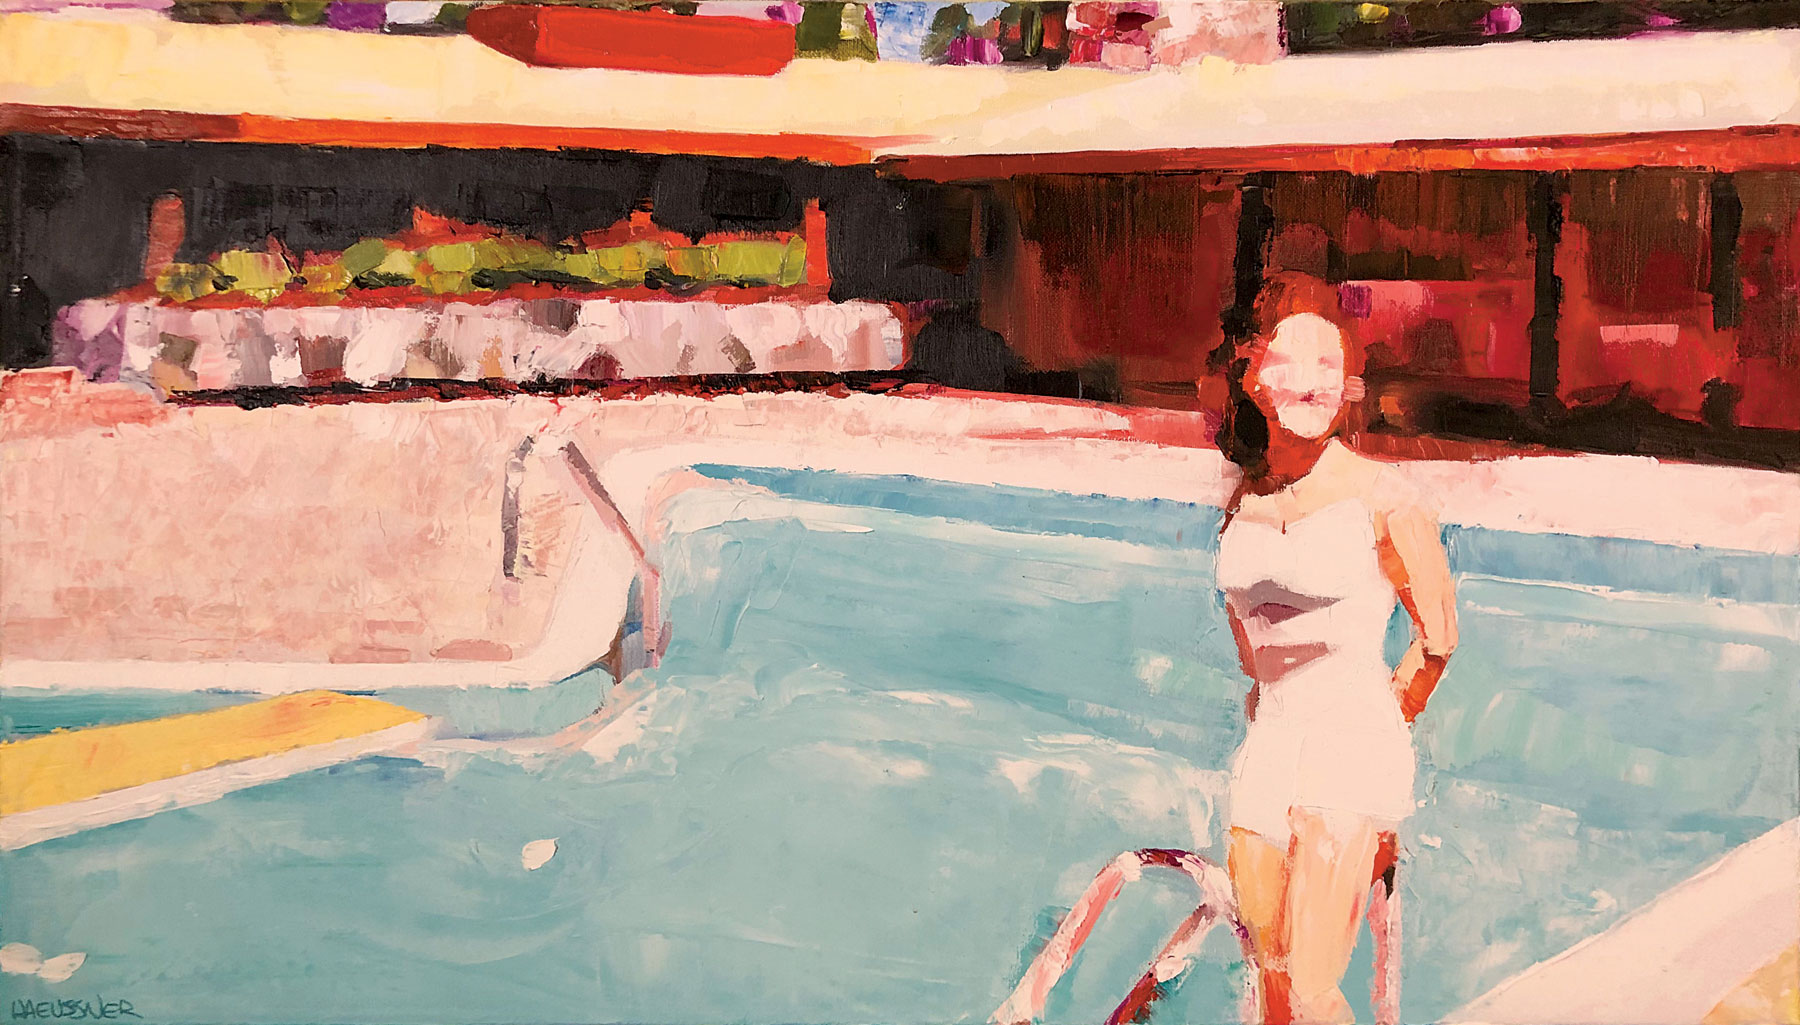 Painting of woman in front of a pool